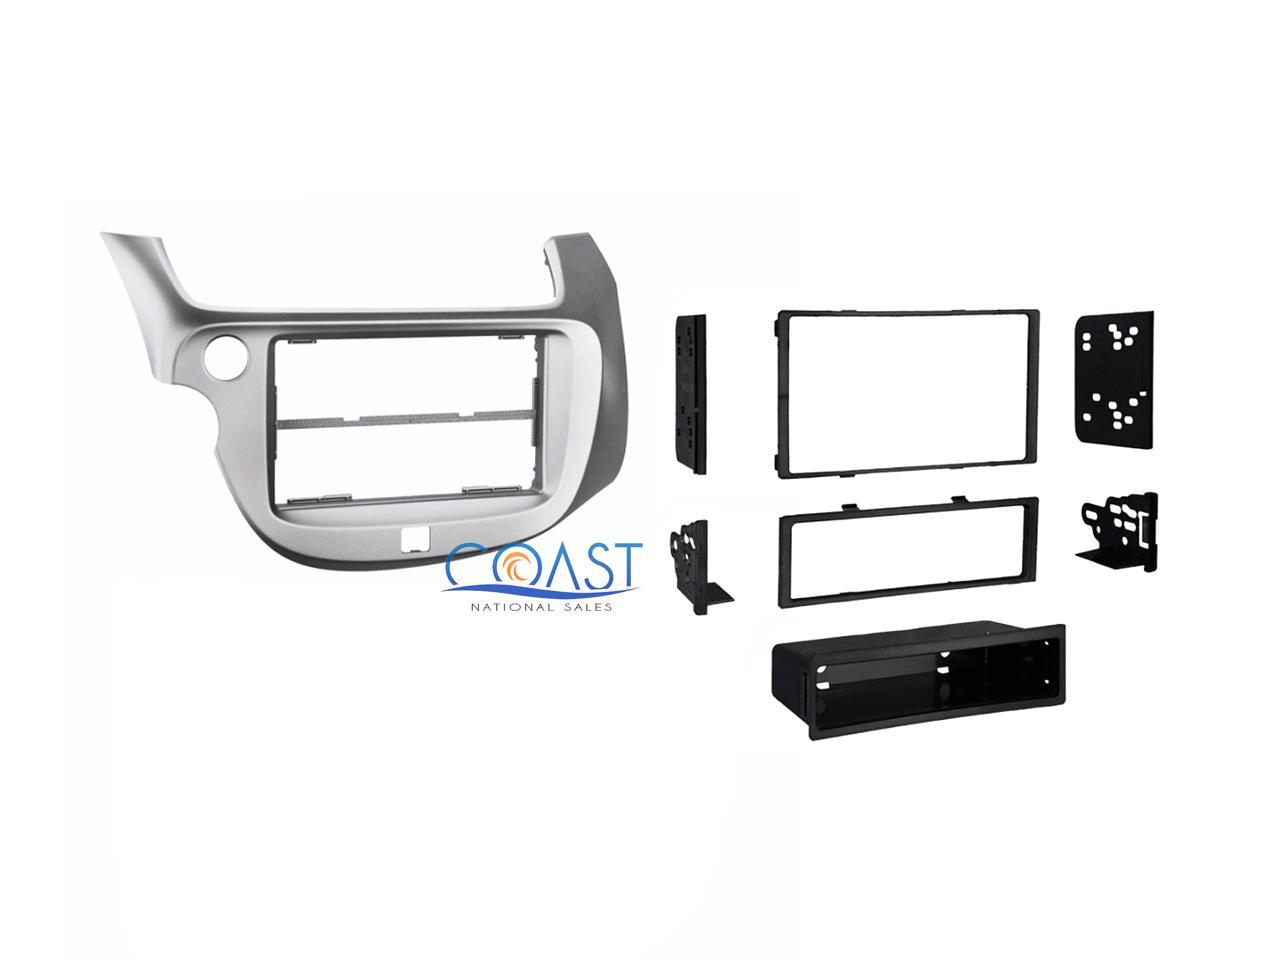 NEW METRA 95-7877S DOUBLE DIN DASH KIT FOR 2009-UP HONDA FIT SILVER 